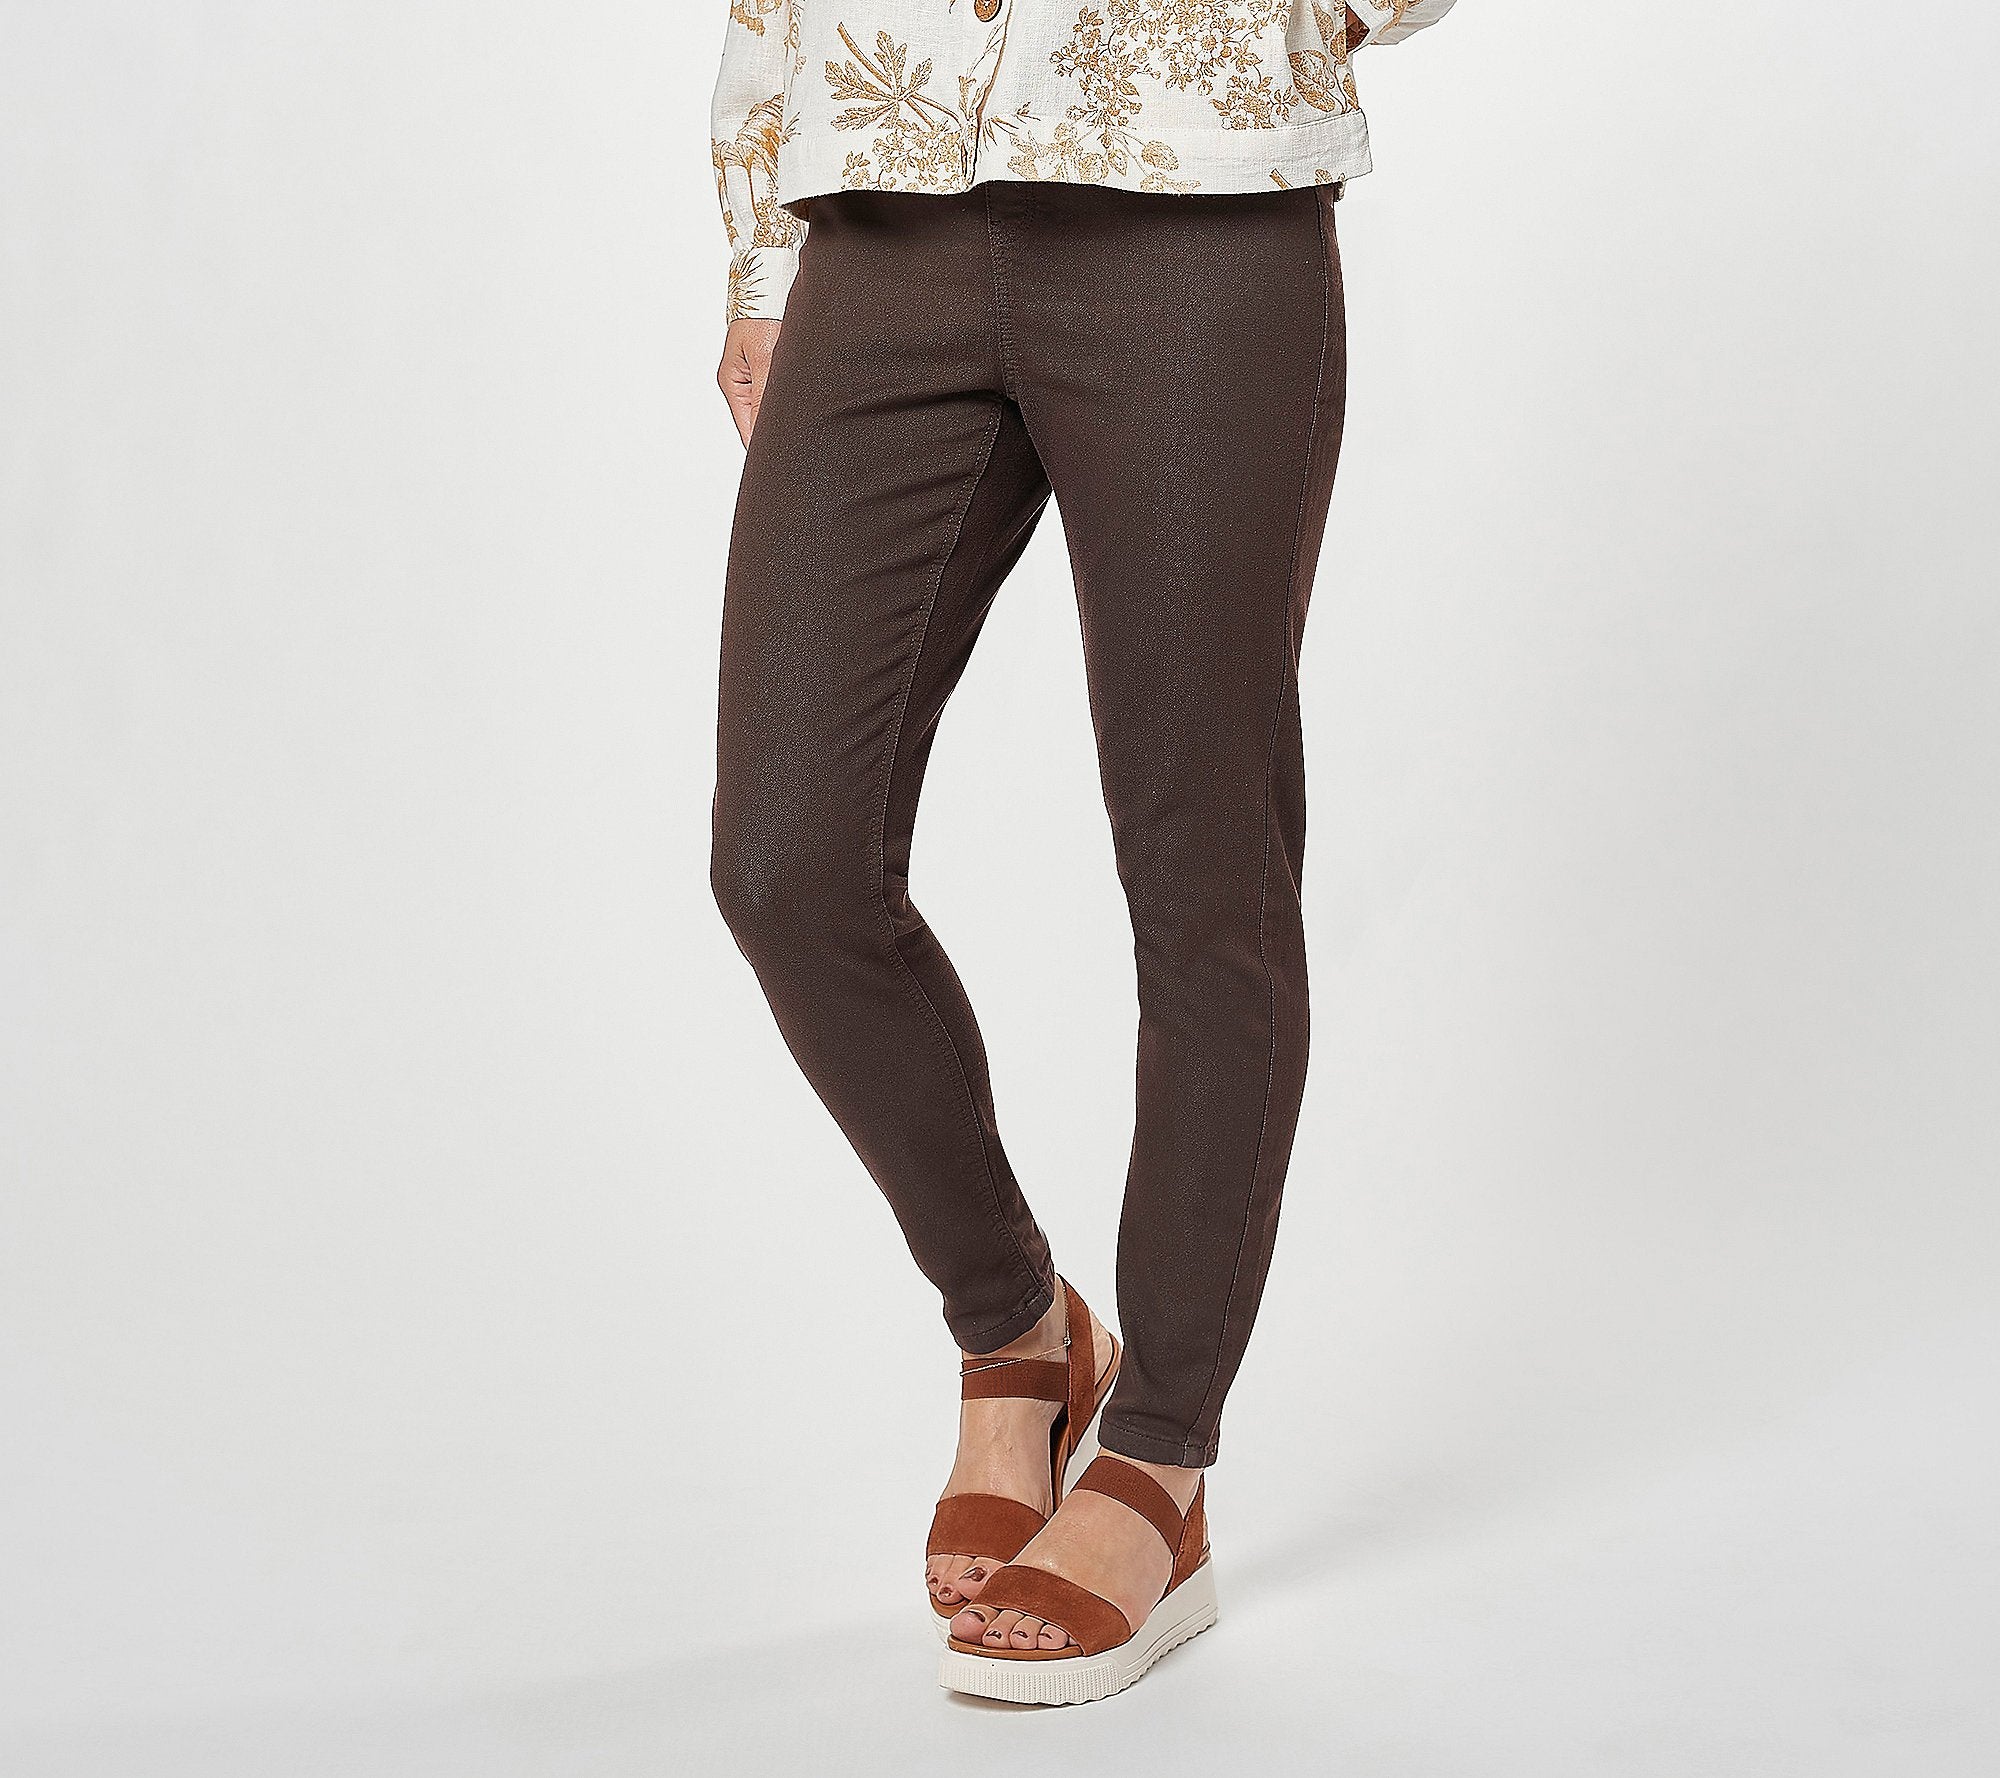 Denim & Co. Comfy Knit Pull-On Jeggings with Stud Detail